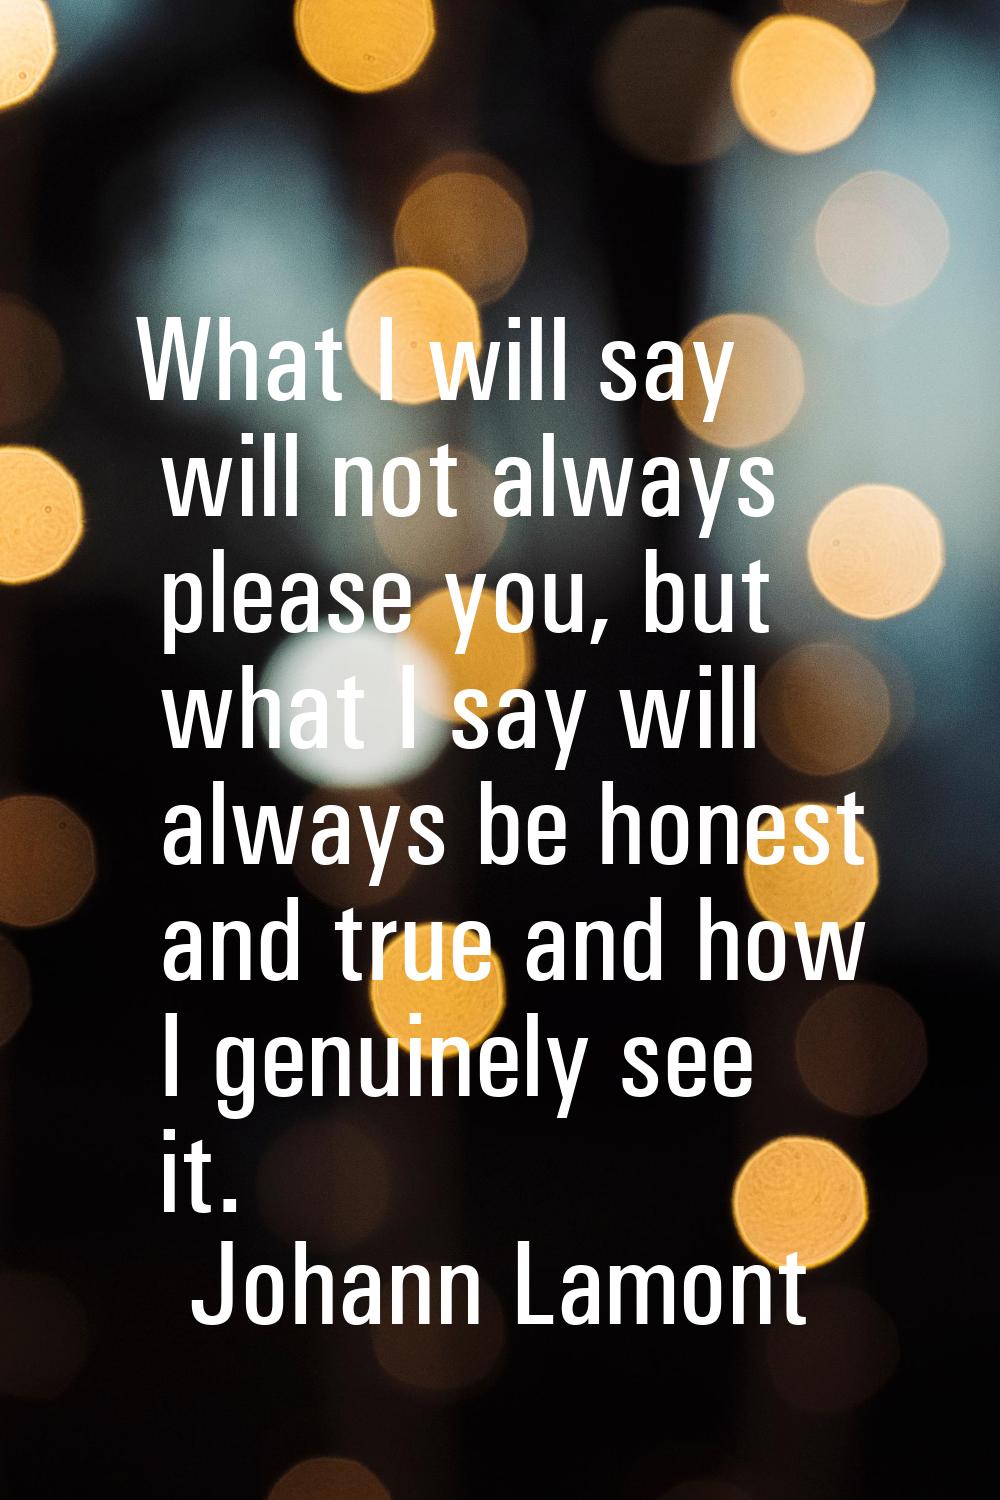 What I will say will not always please you, but what I say will always be honest and true and how I